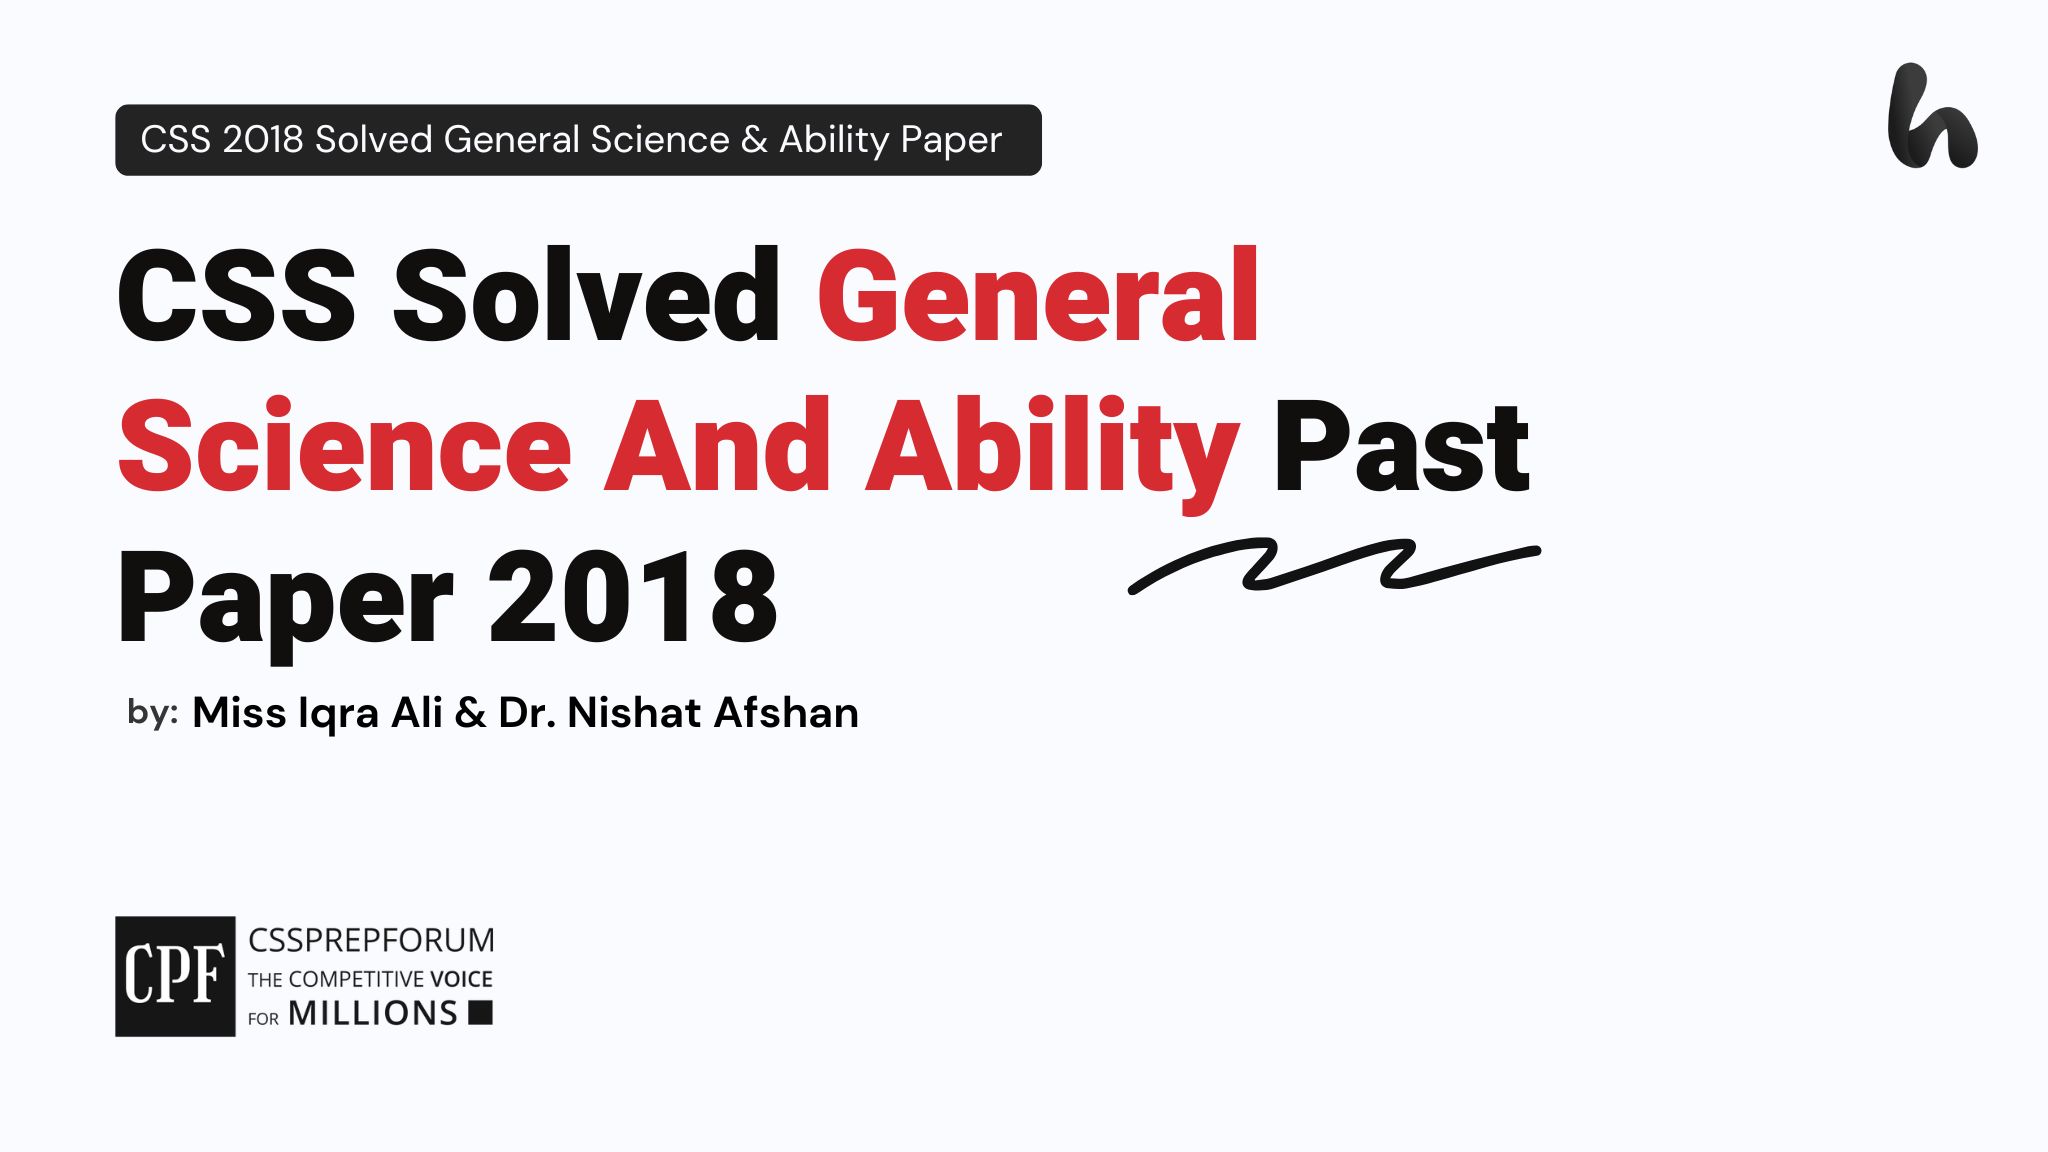 CSS Solved General Science And Ability Past Paper 2018 by Miss Iqra Ali and Dr Nishat Afshan